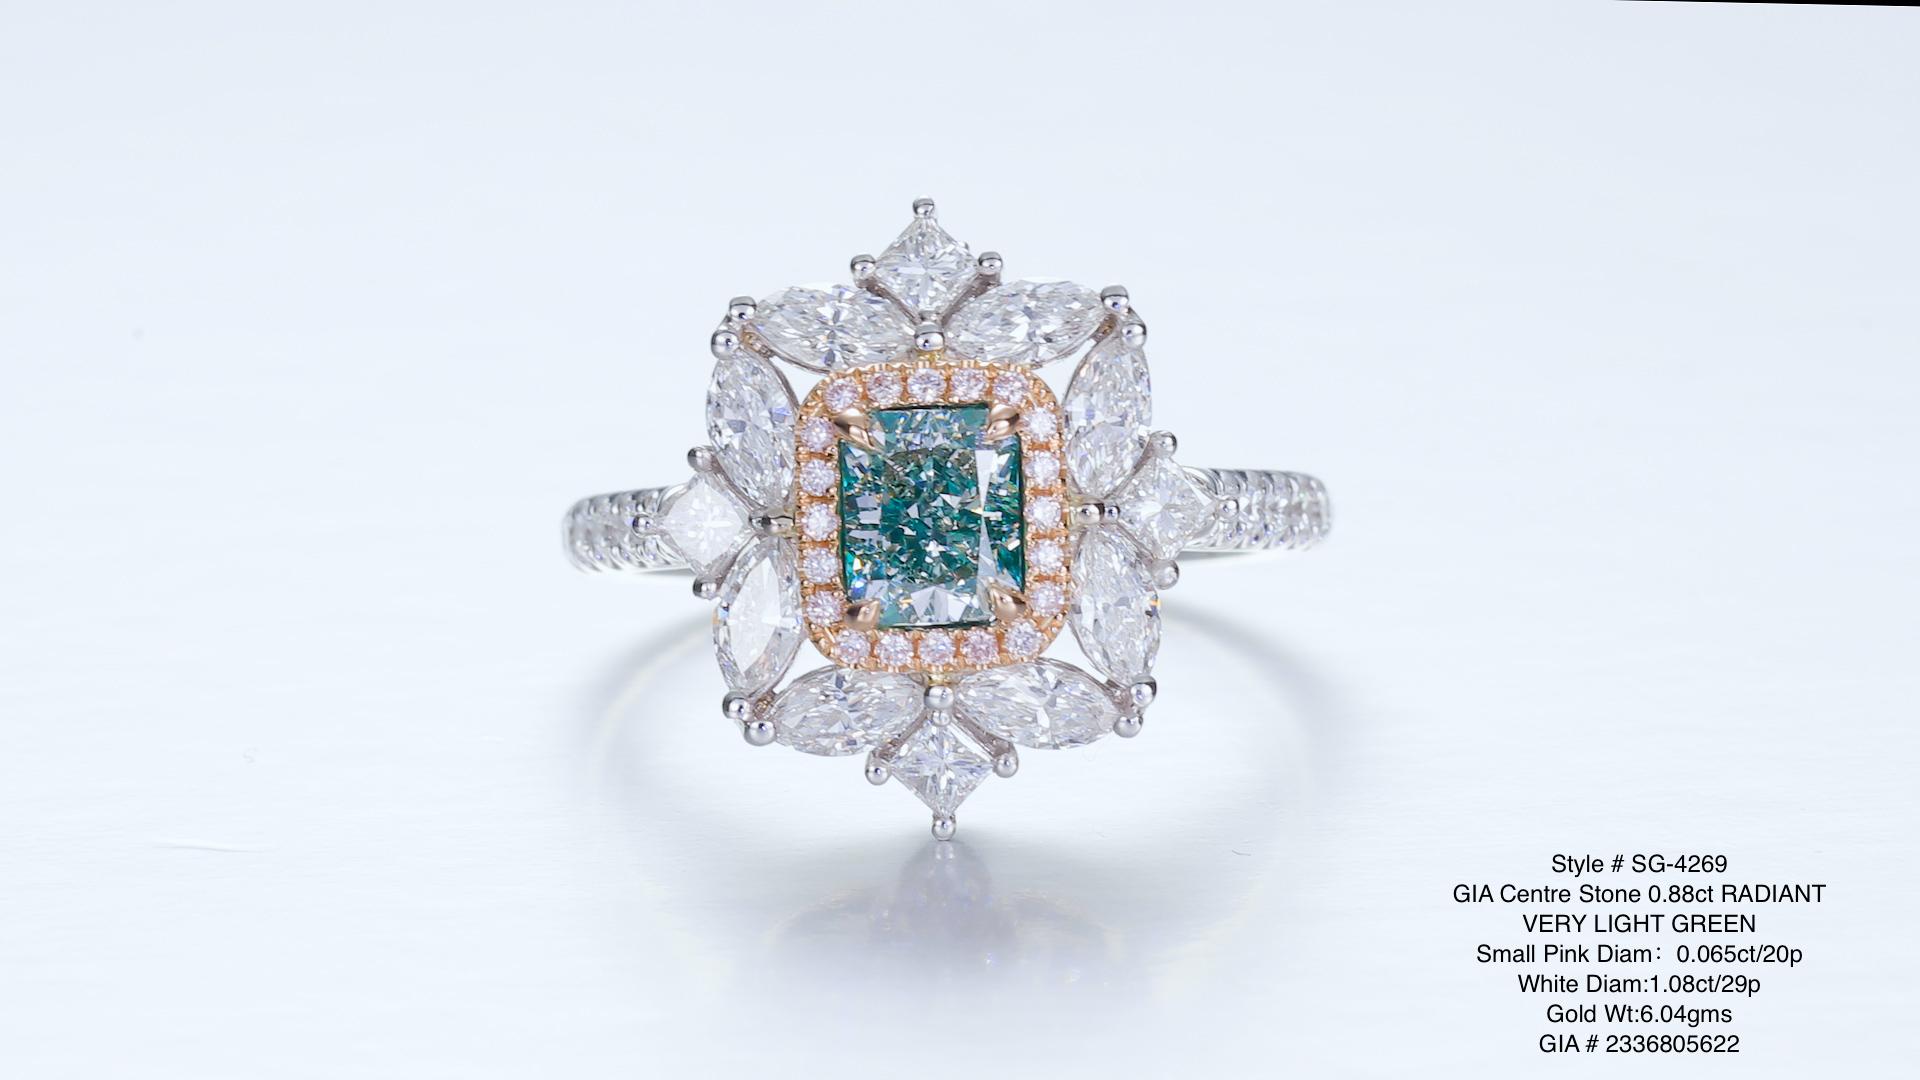 0.88ct very light green radiant mounted on 18KT gold with white and pink diamonds on the side.

The enchanting beauty of this 0.88ct fancy very light green diamond ring, delicately mounted on 18KT gold. The rare and captivating green diamond steals